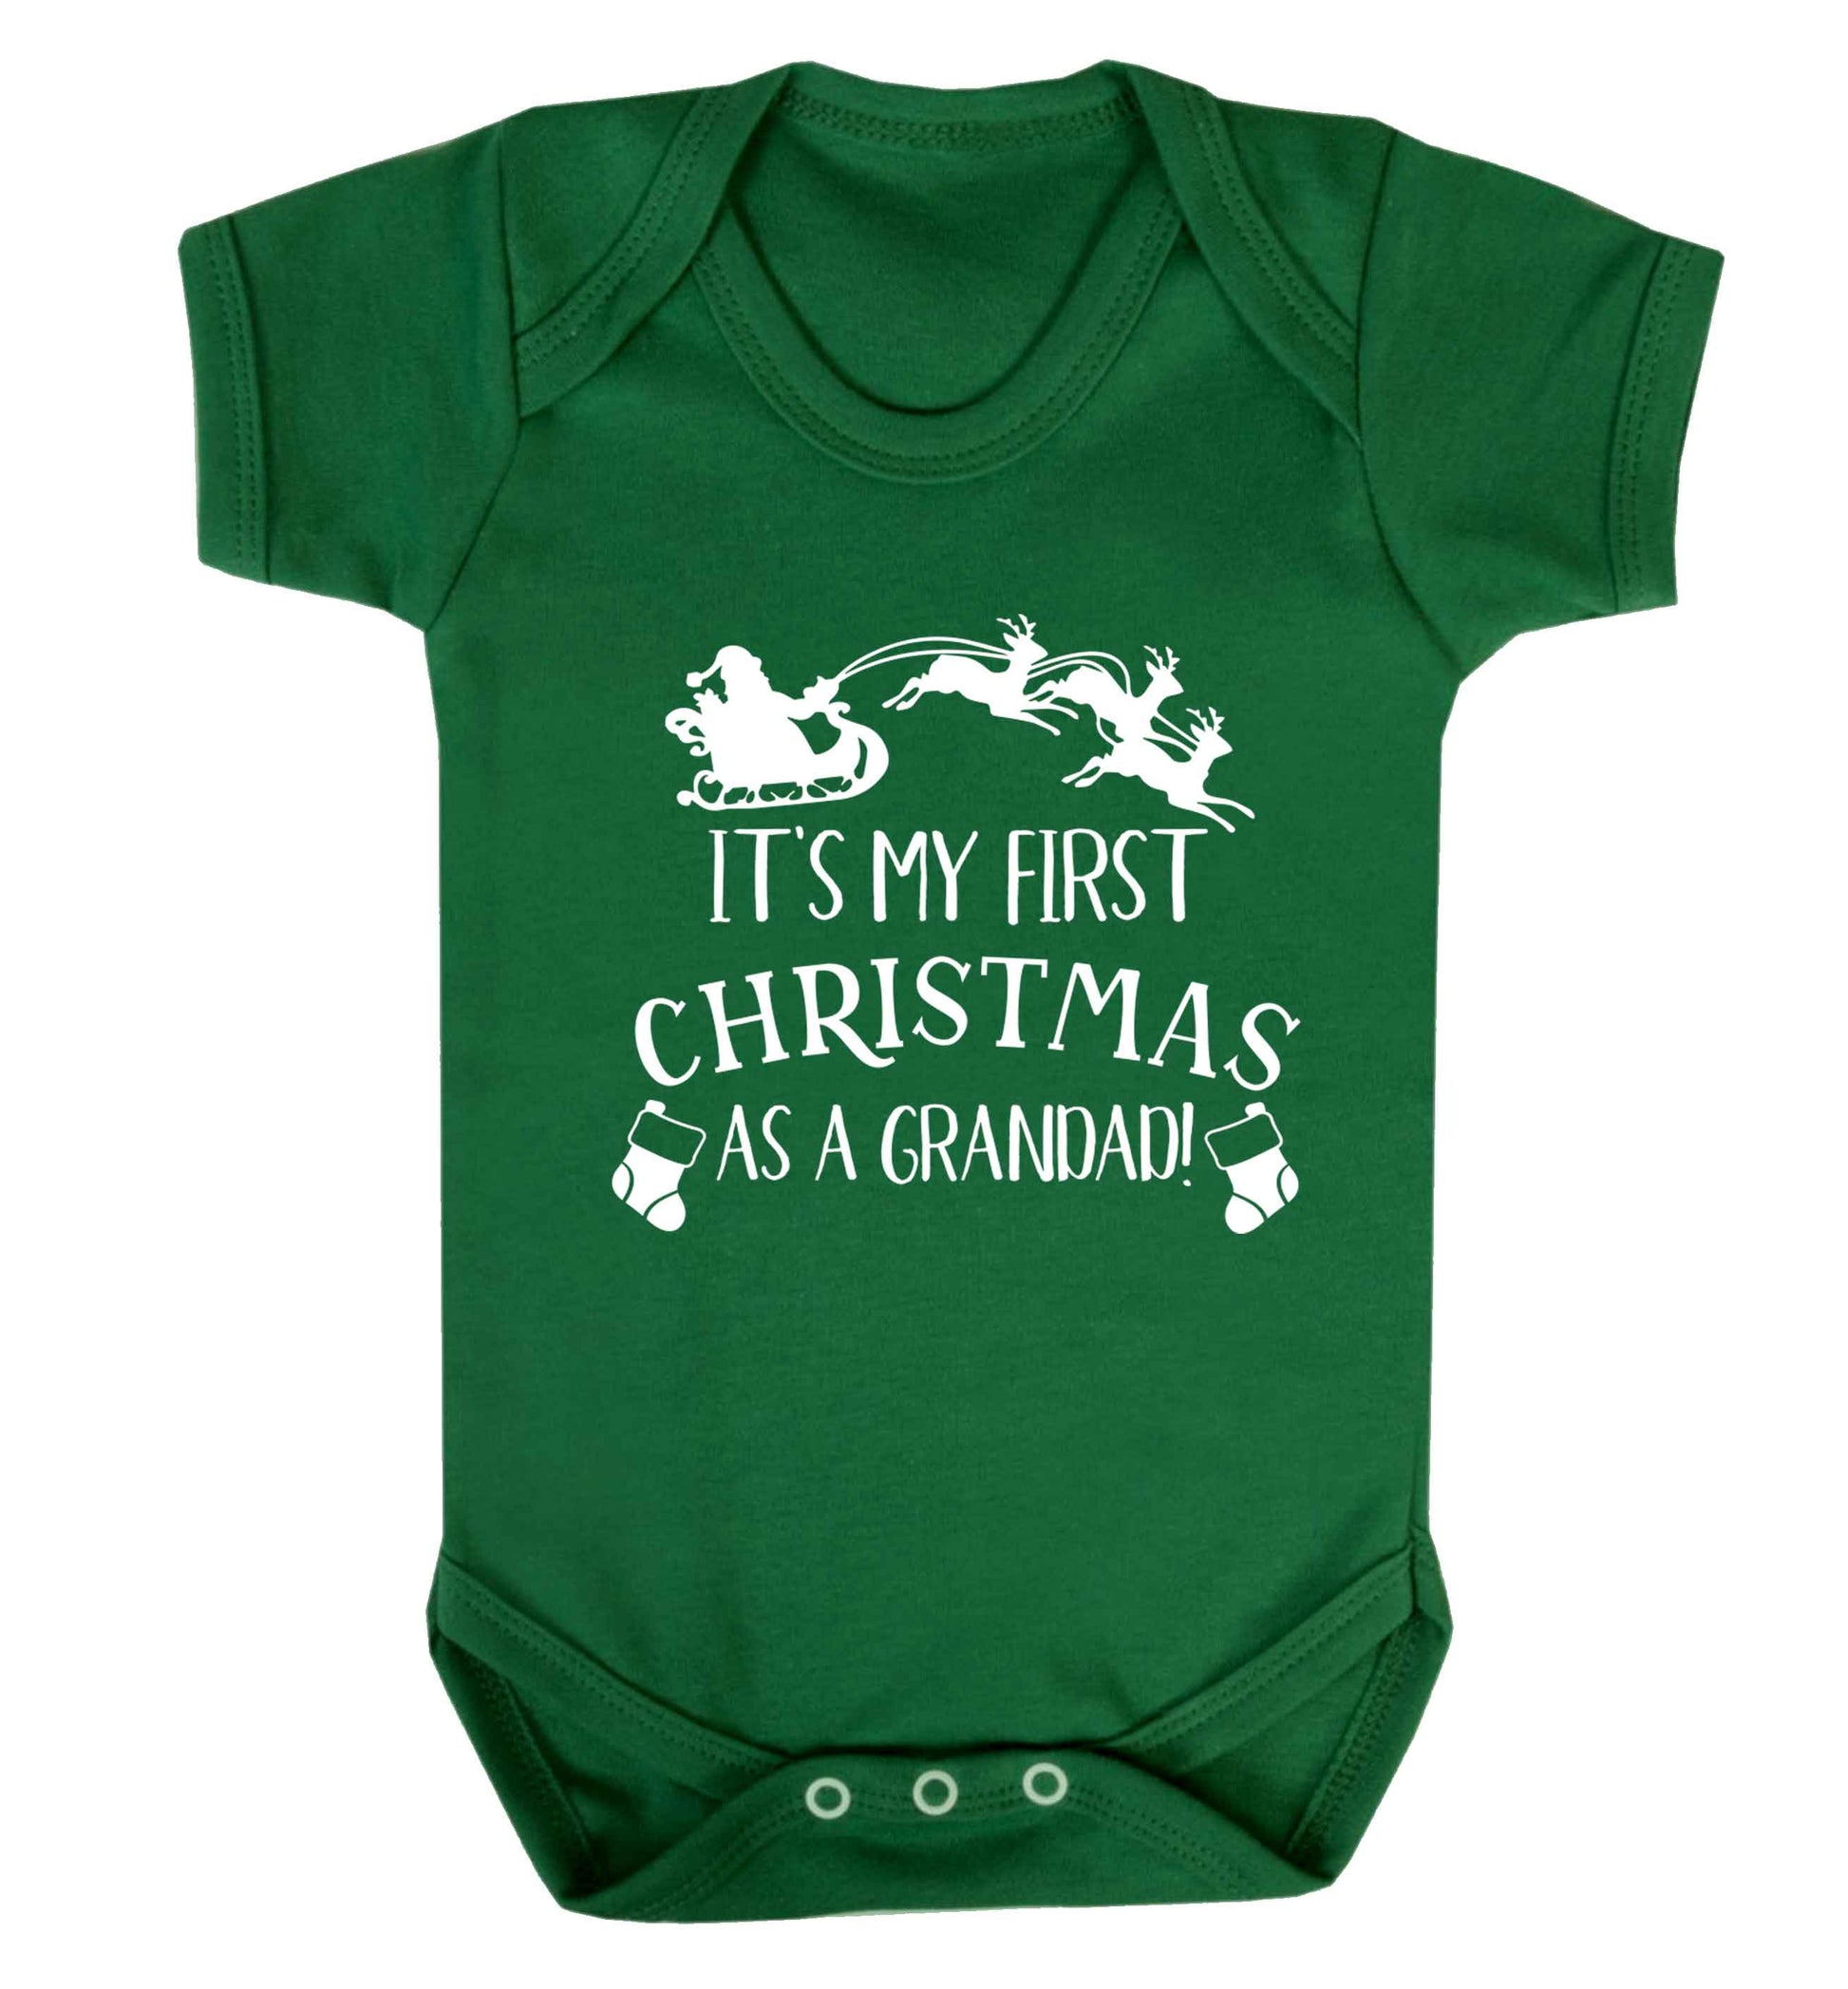 It's my first Christmas as a grandad! Baby Vest green 18-24 months